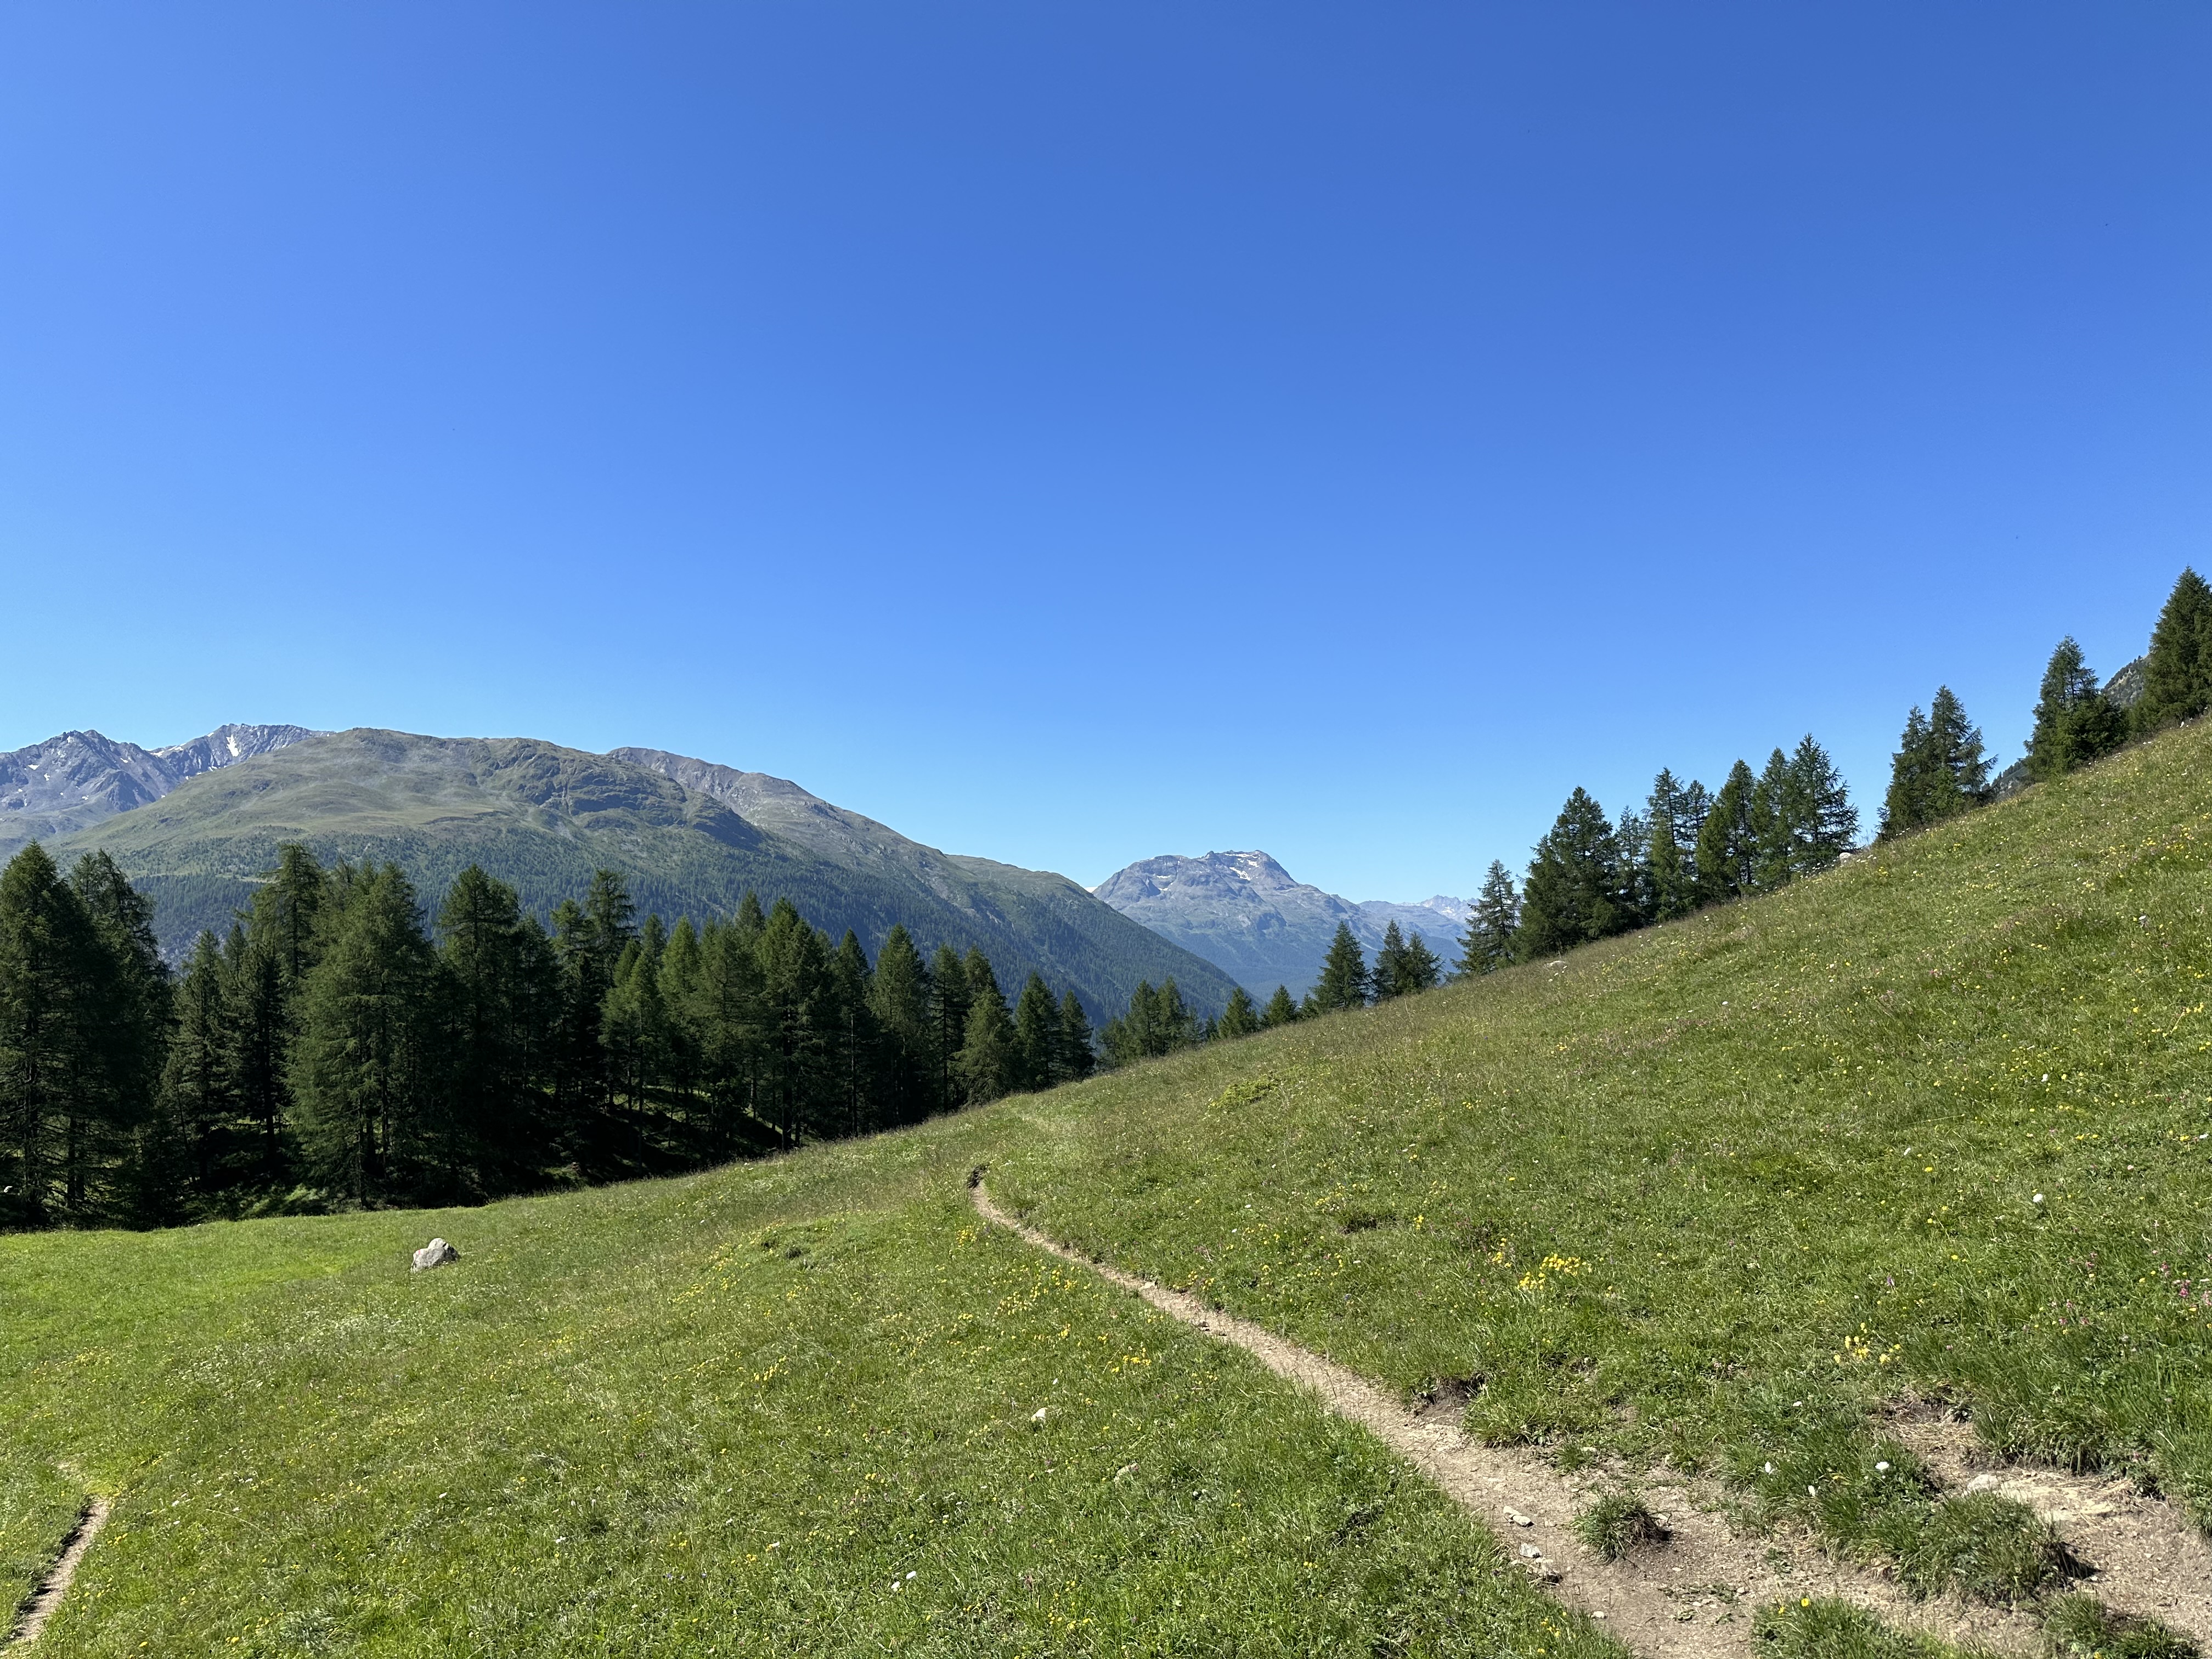 View of hiking trail across an alpine pasture under a clear blue sky.